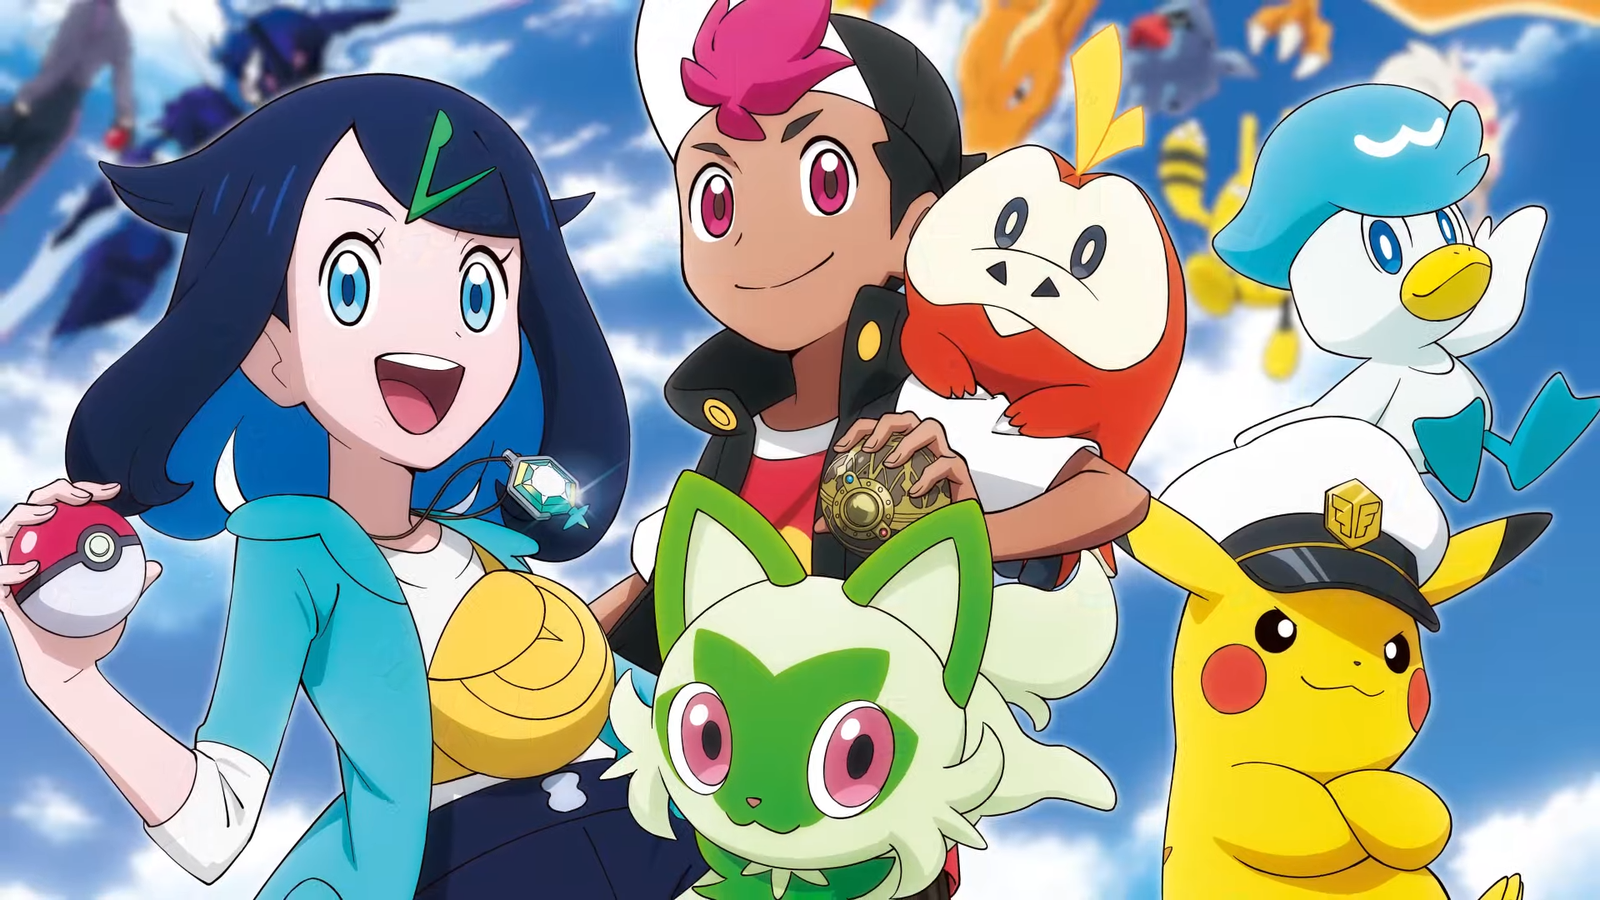 Pokemon 2023 anime set to introduce new character with Ceruledge